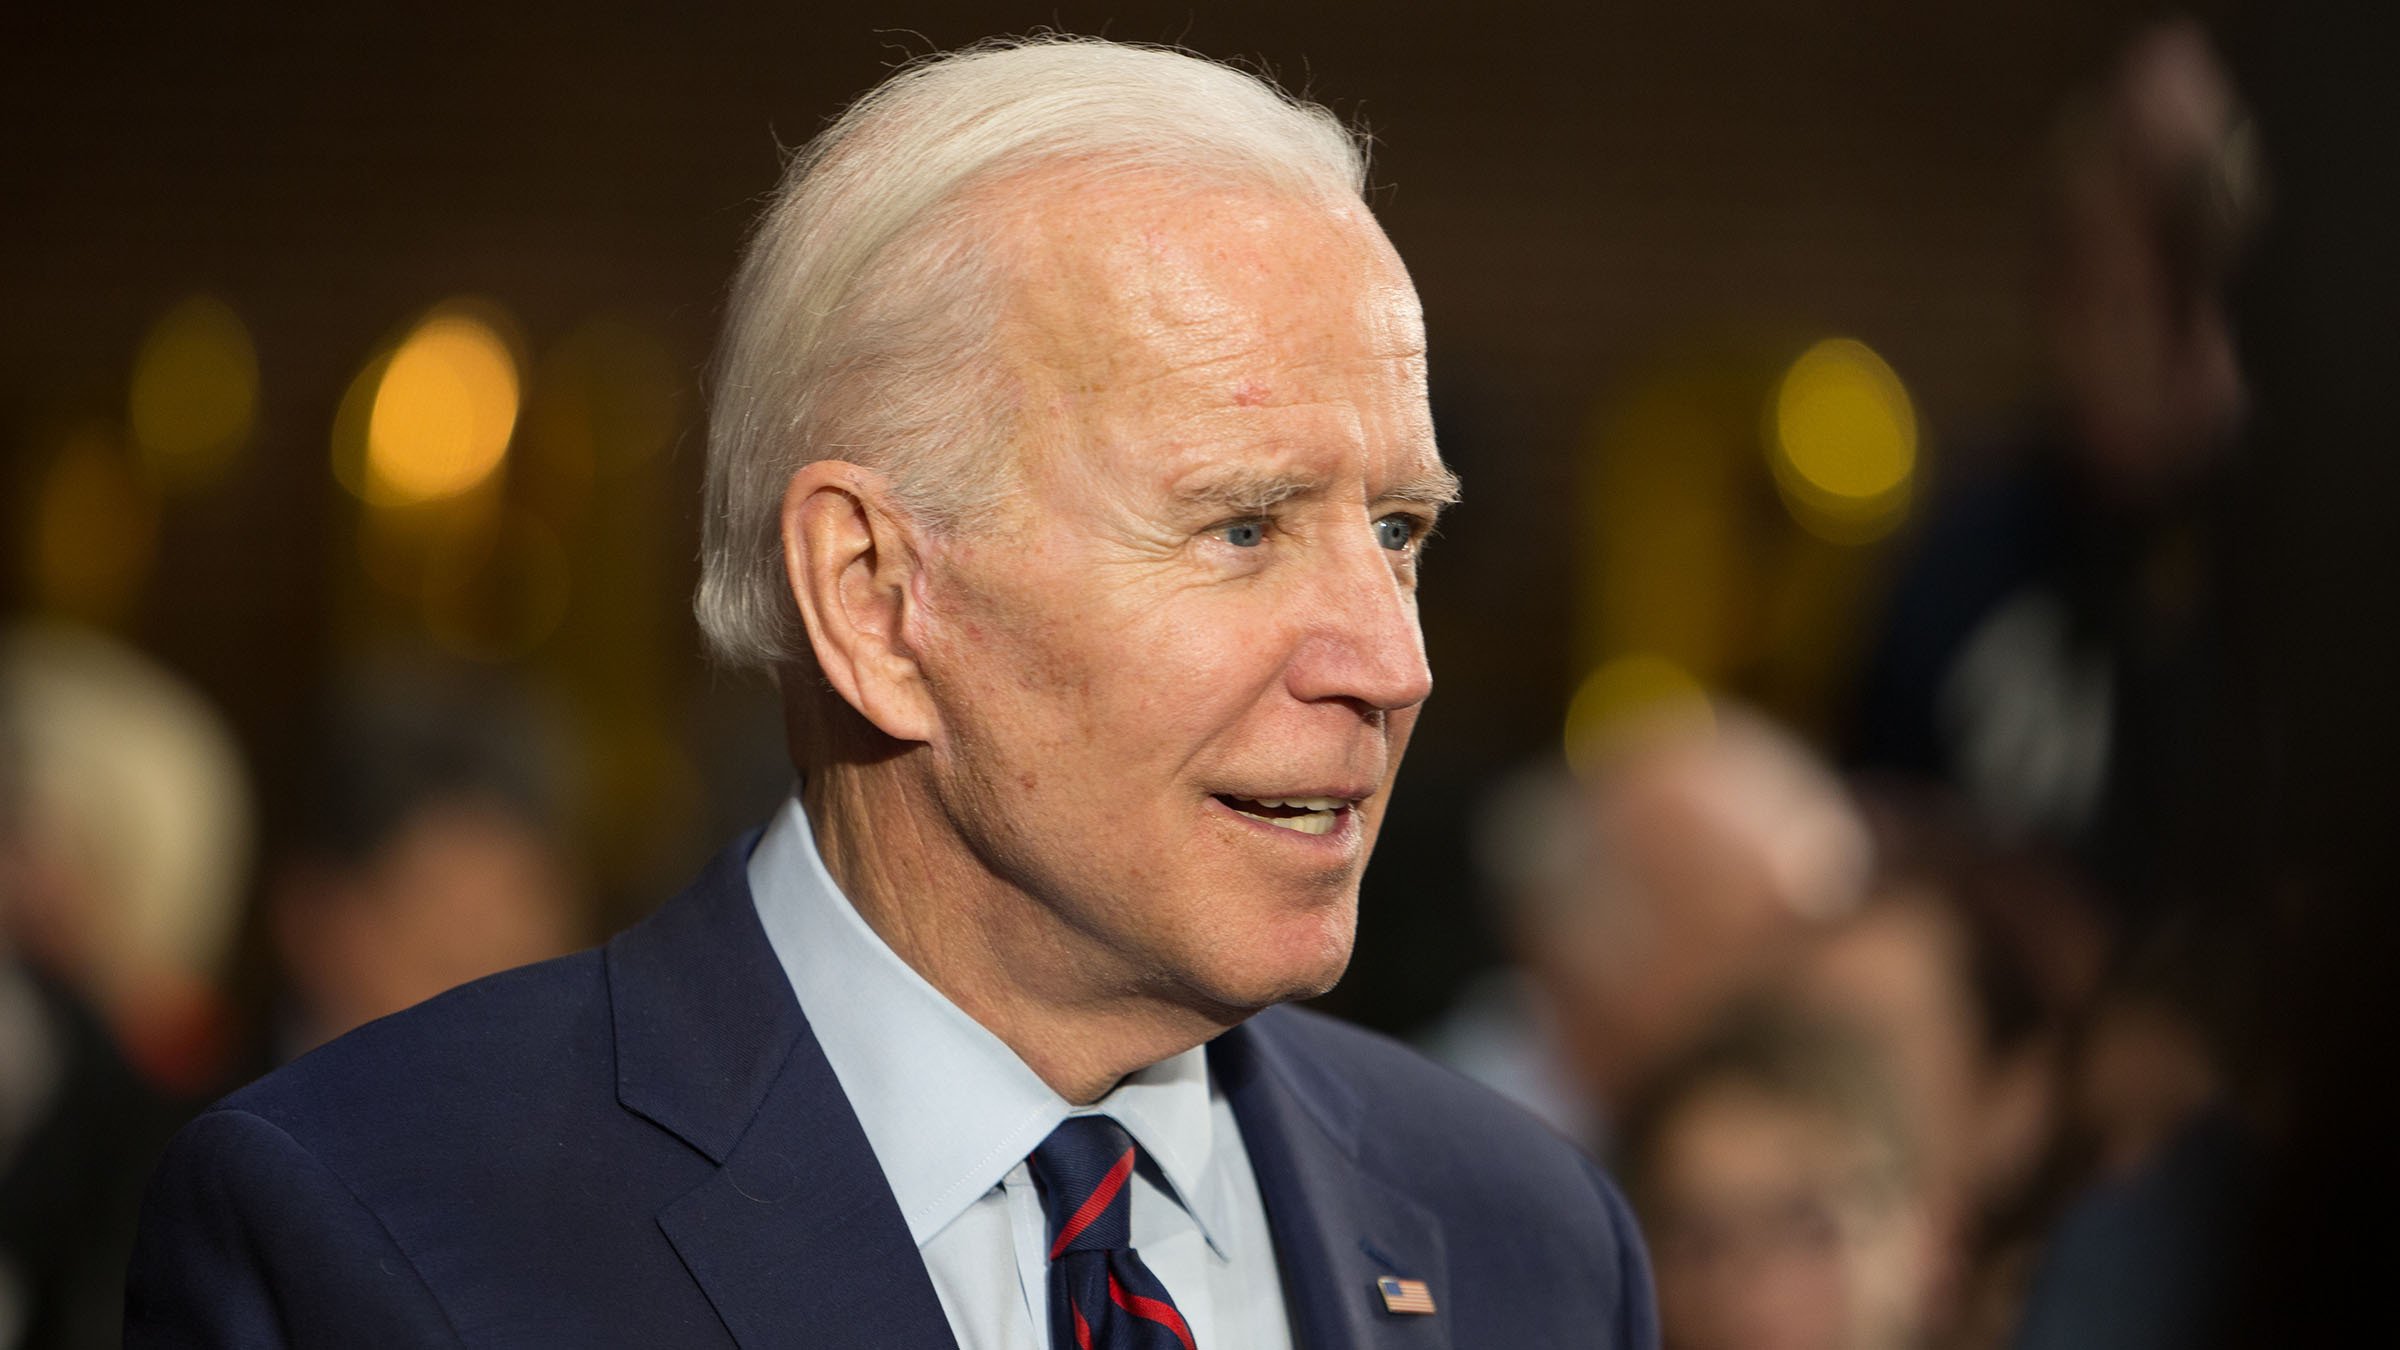 BODEN Sinks 38% As Biden Candidacy Is Questioned